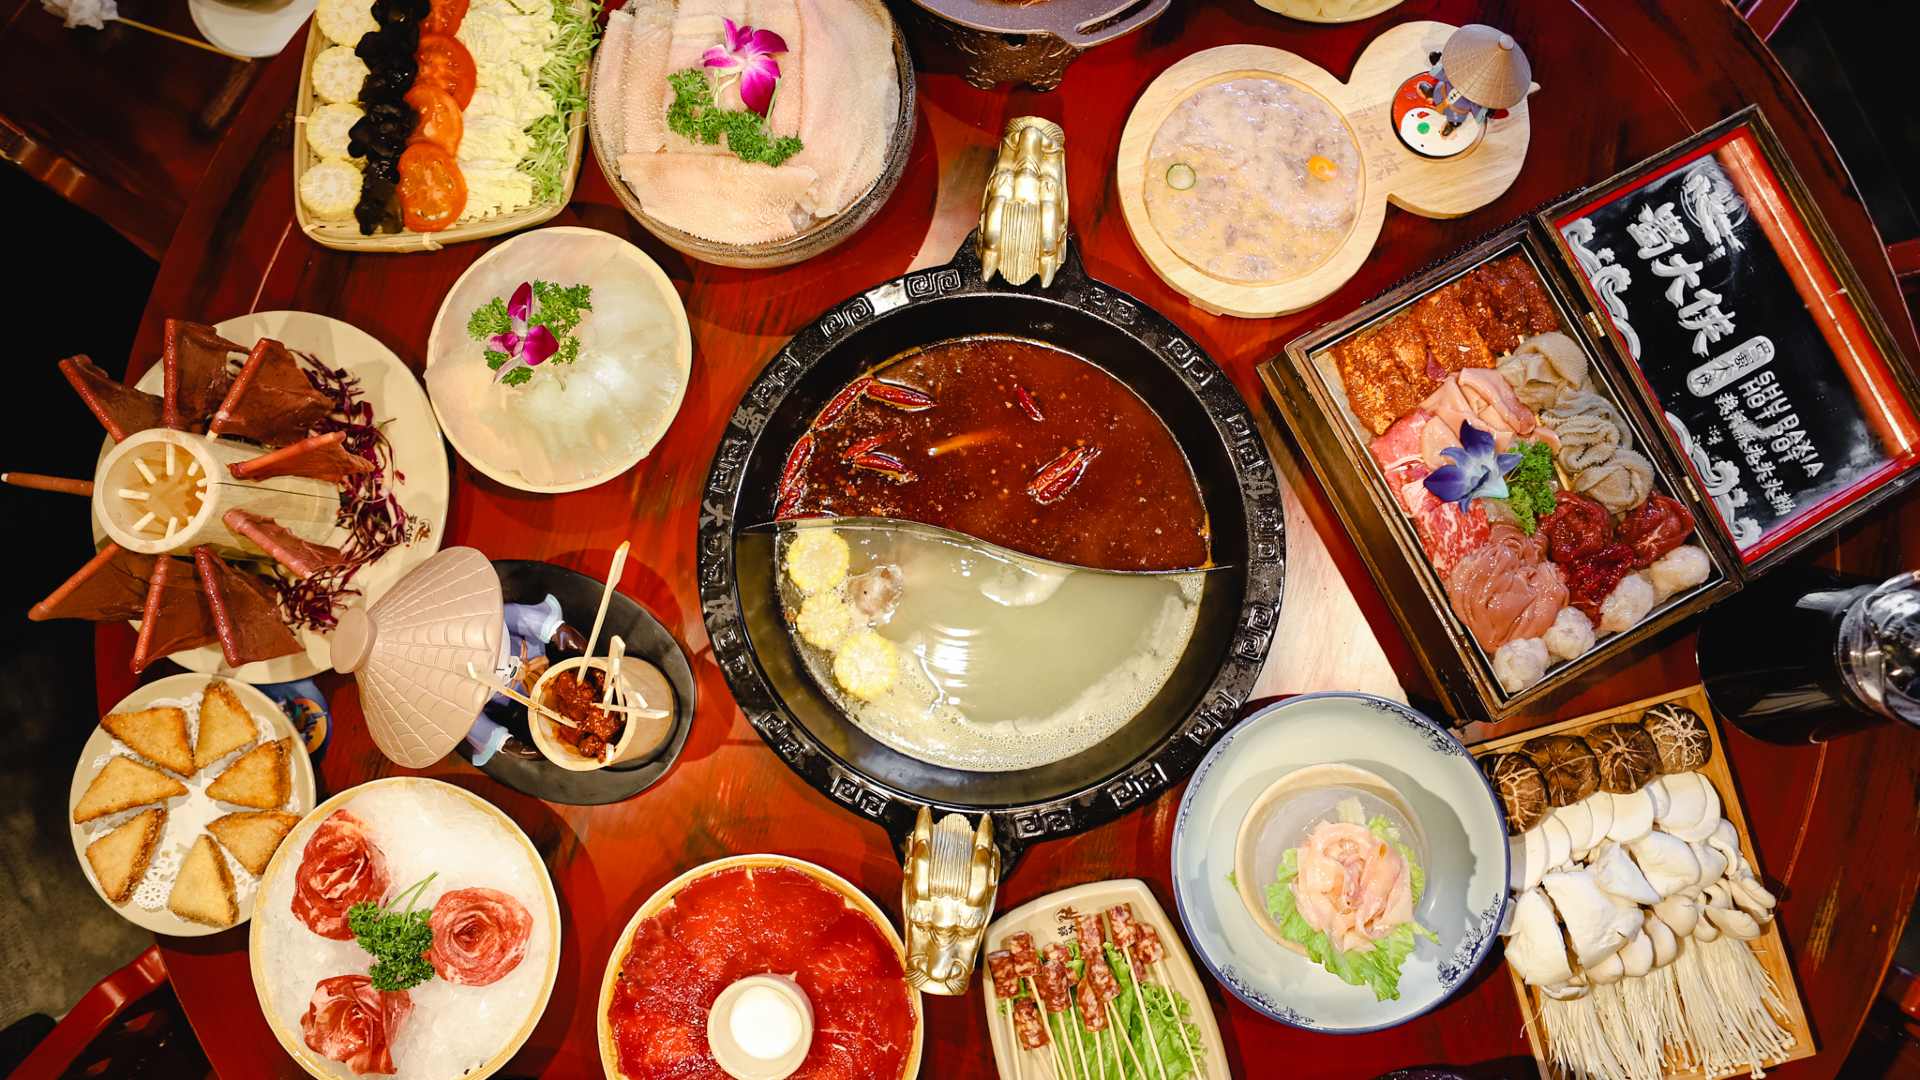 A table full of hot pot essentials at Panda Hot Pot - one of the best hot pots in Melbourne